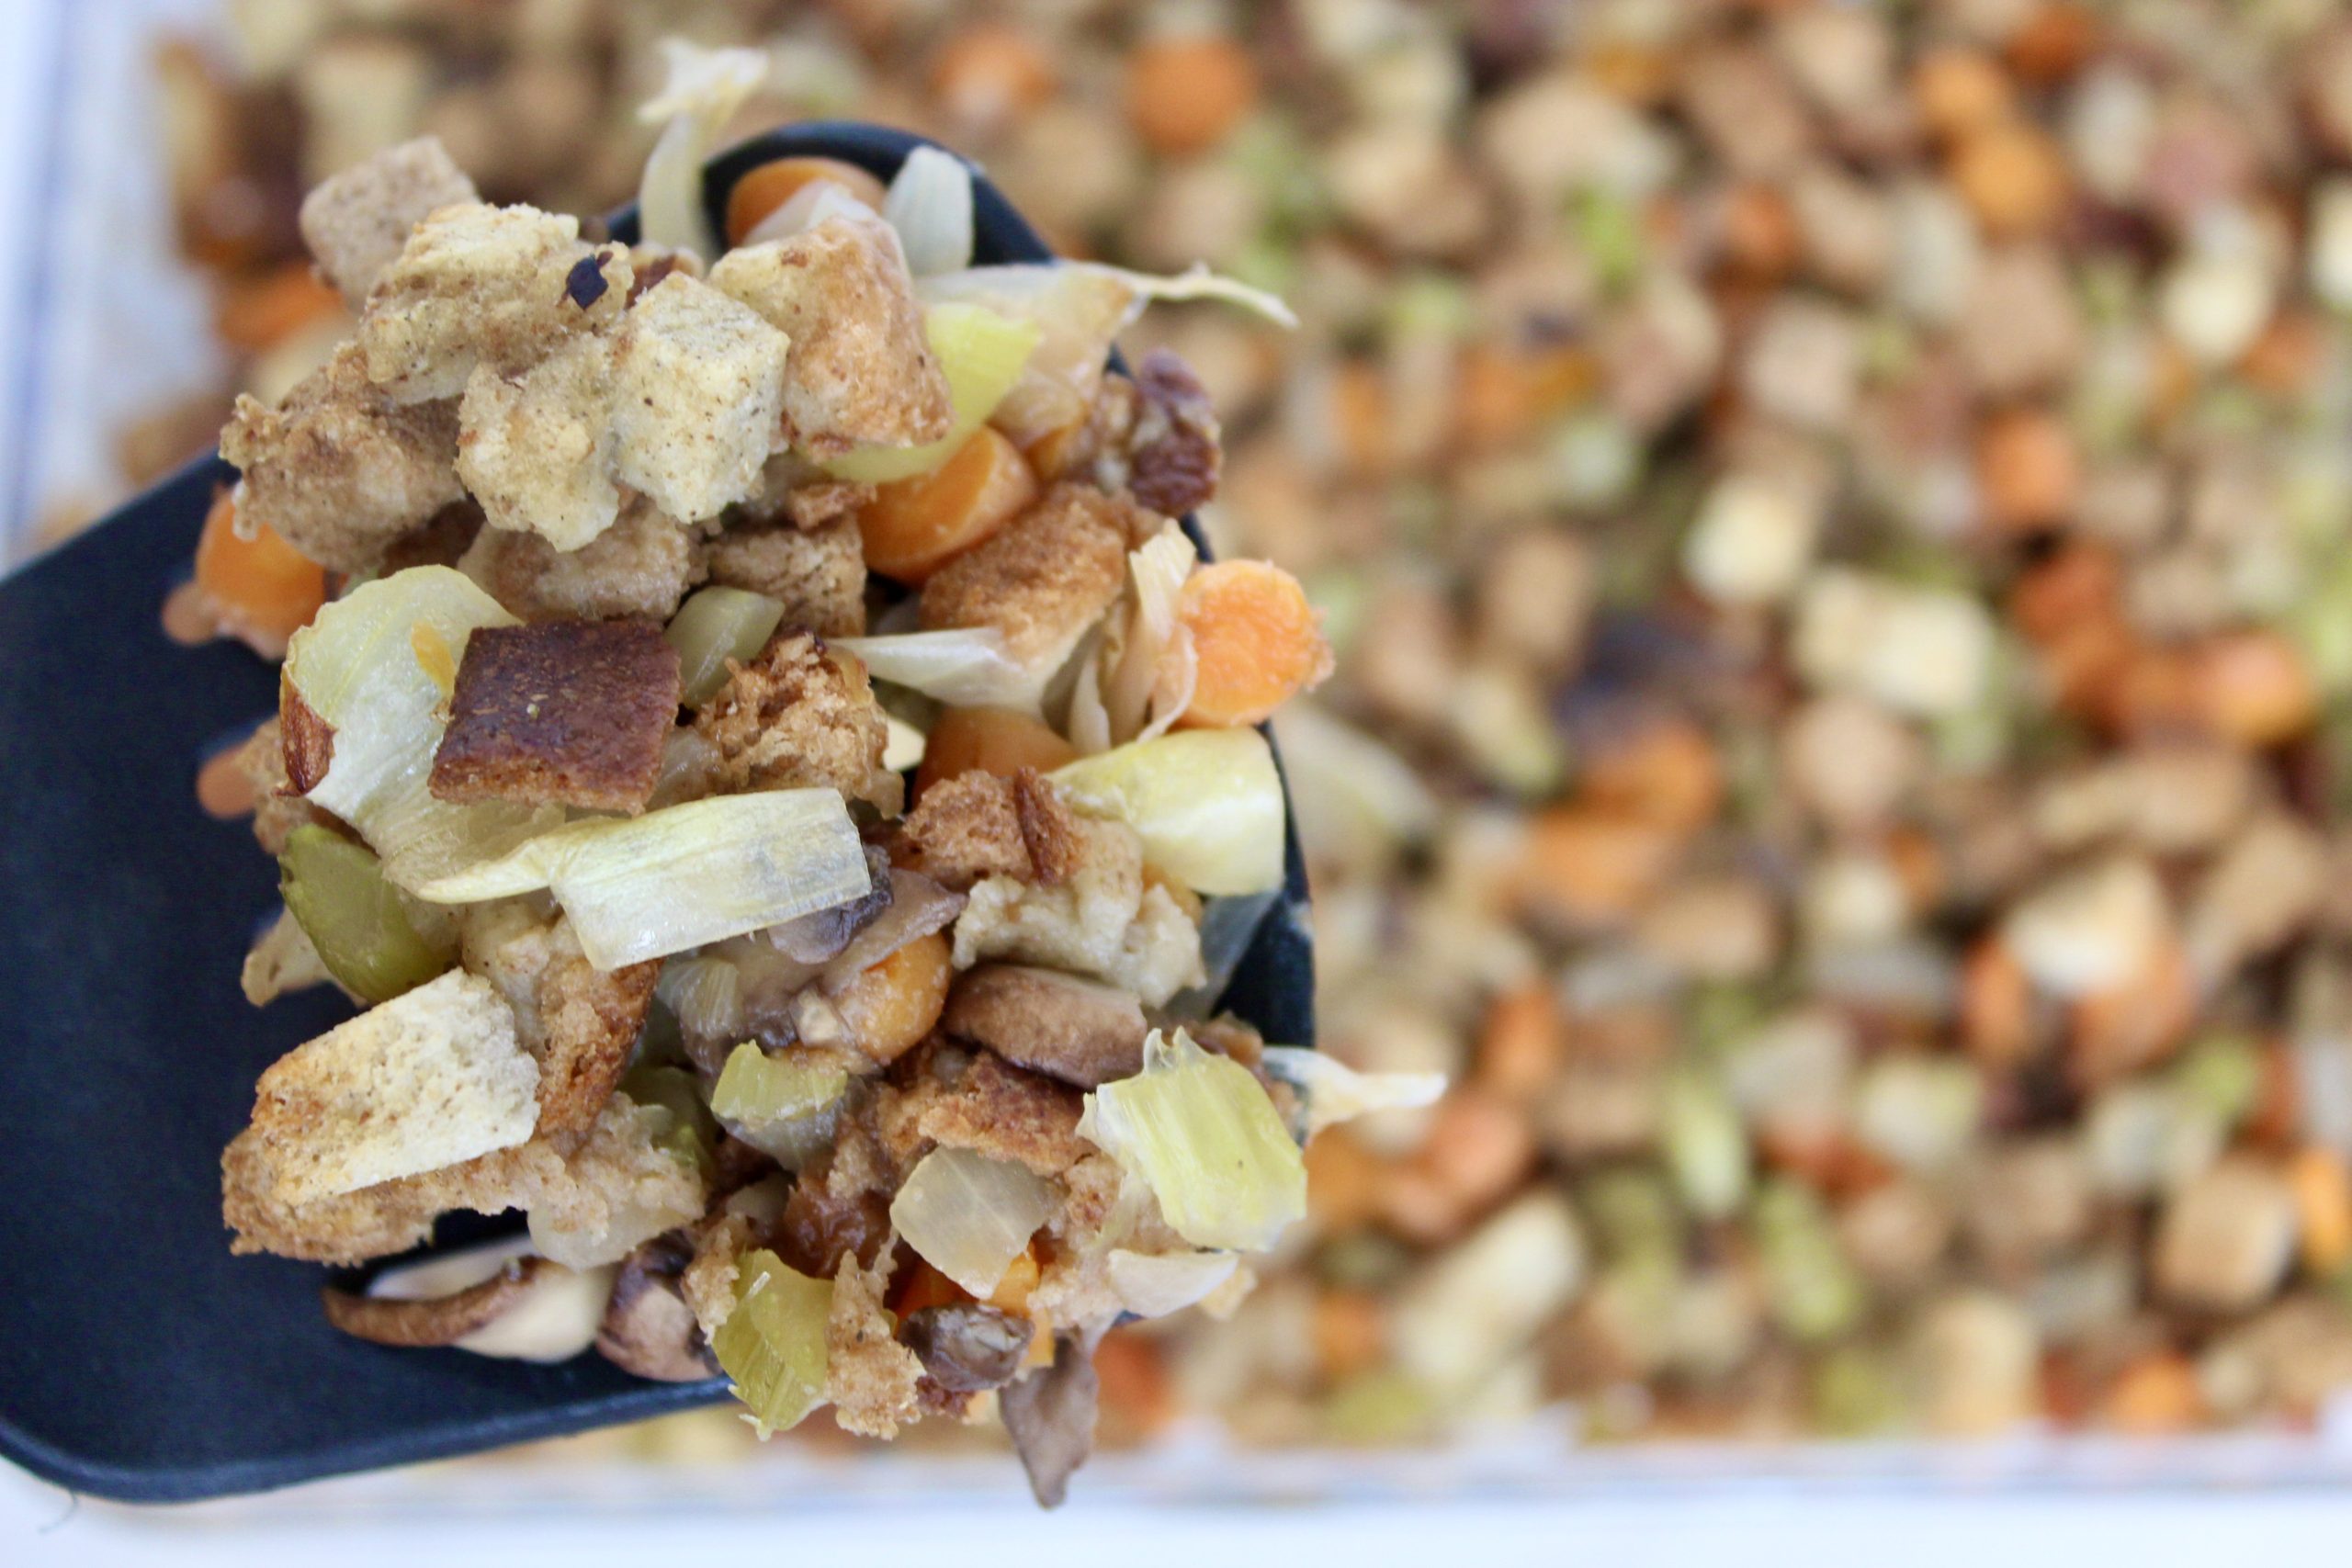 Vegan Stuffing Hack: Make Your Stuffing More Delicious With This